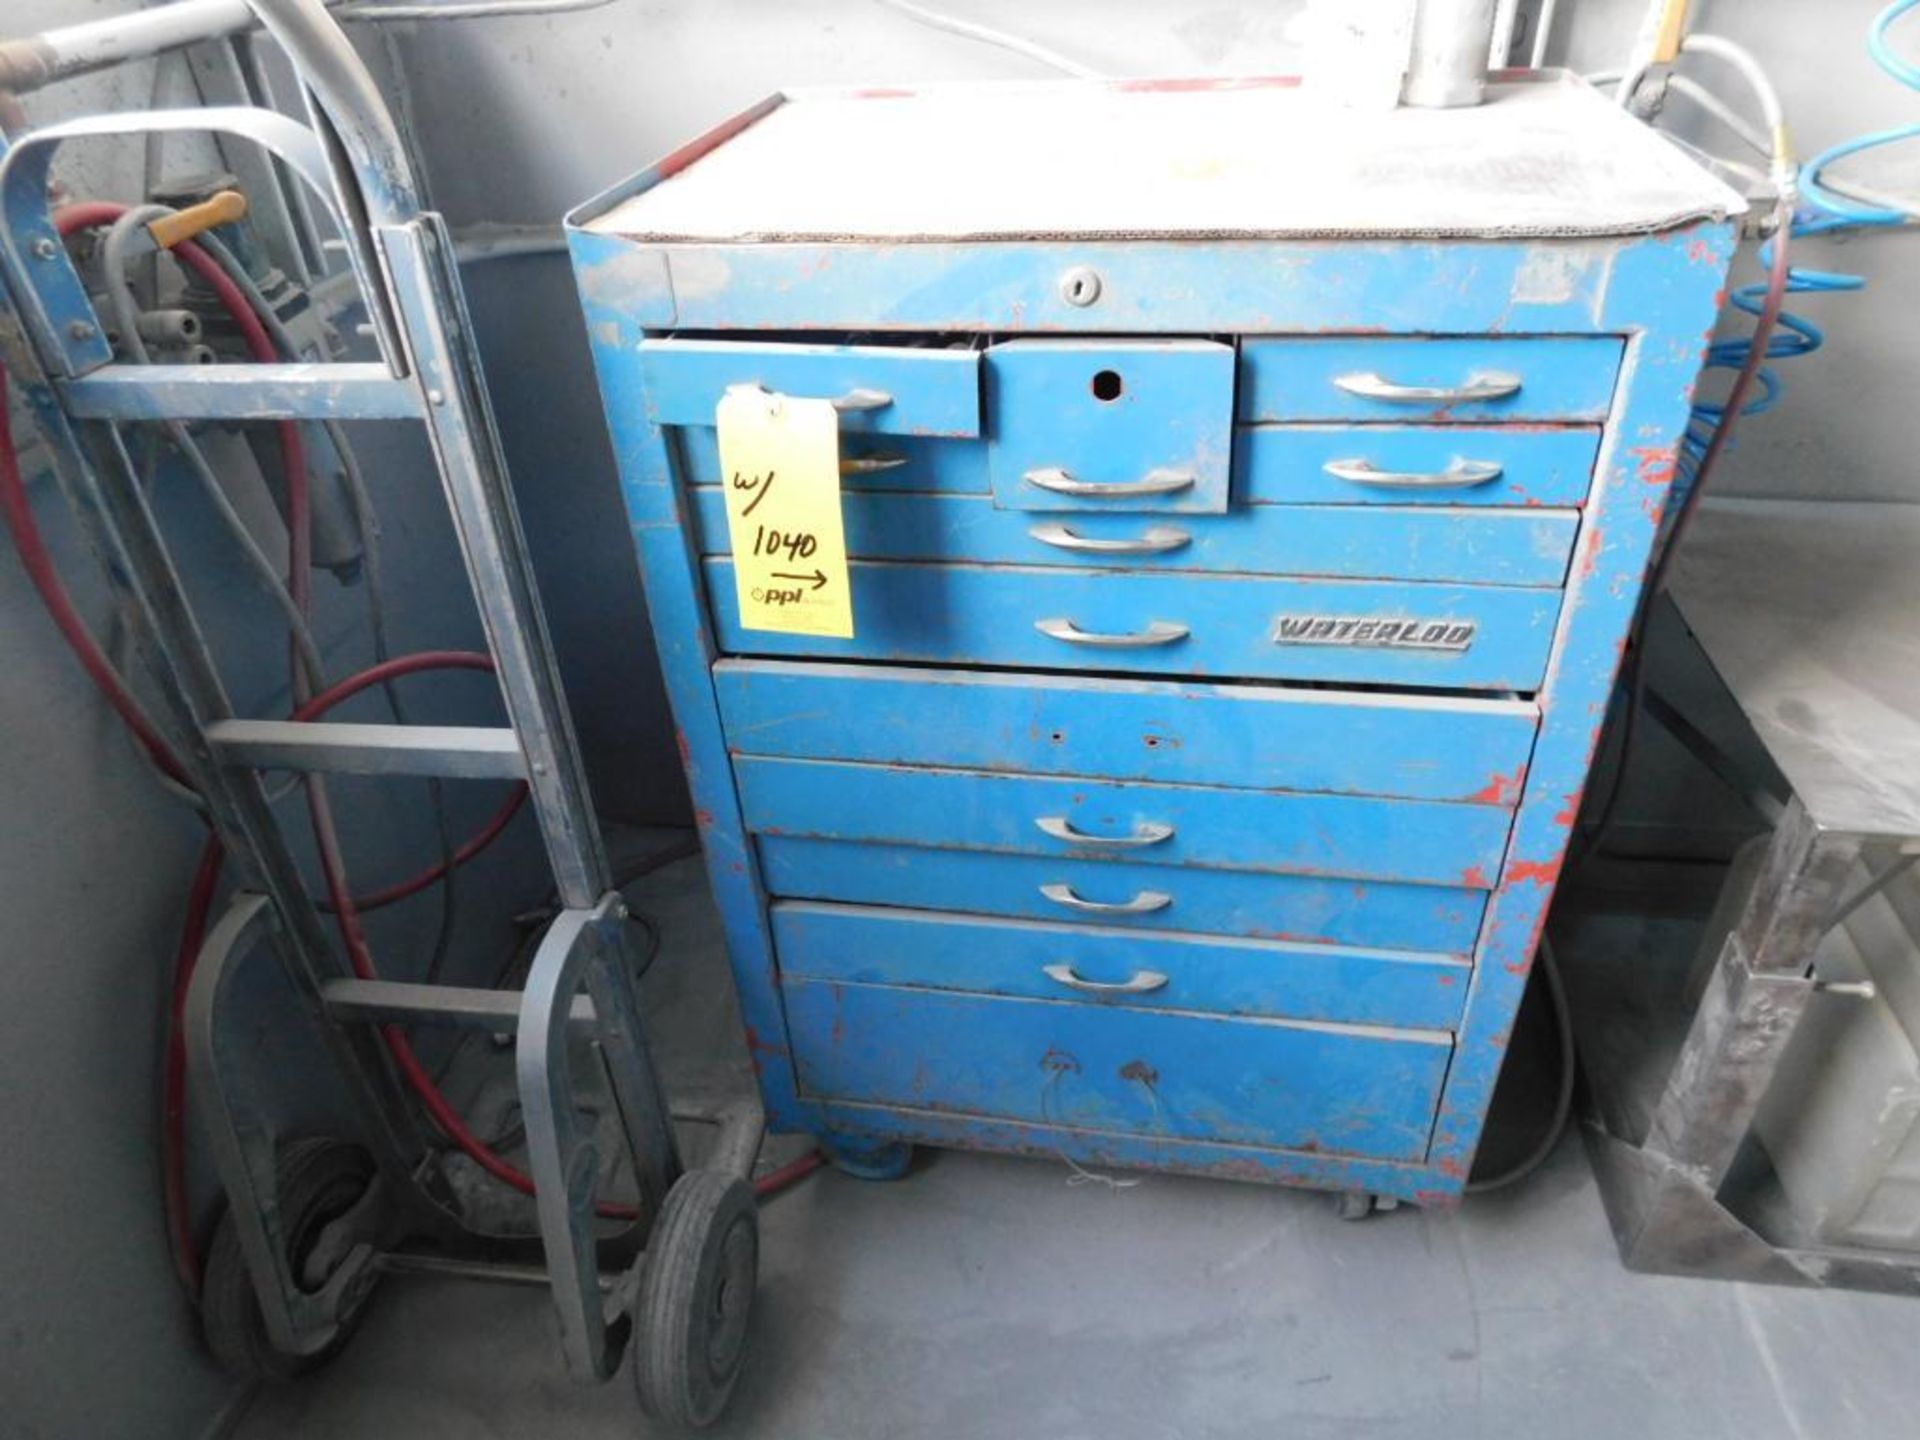 LOT: Abrasive Supplies, Cart, Tool Box, 30" x 72" Maple Top Work Bench, Fans, Heaters, etc. - Image 7 of 11